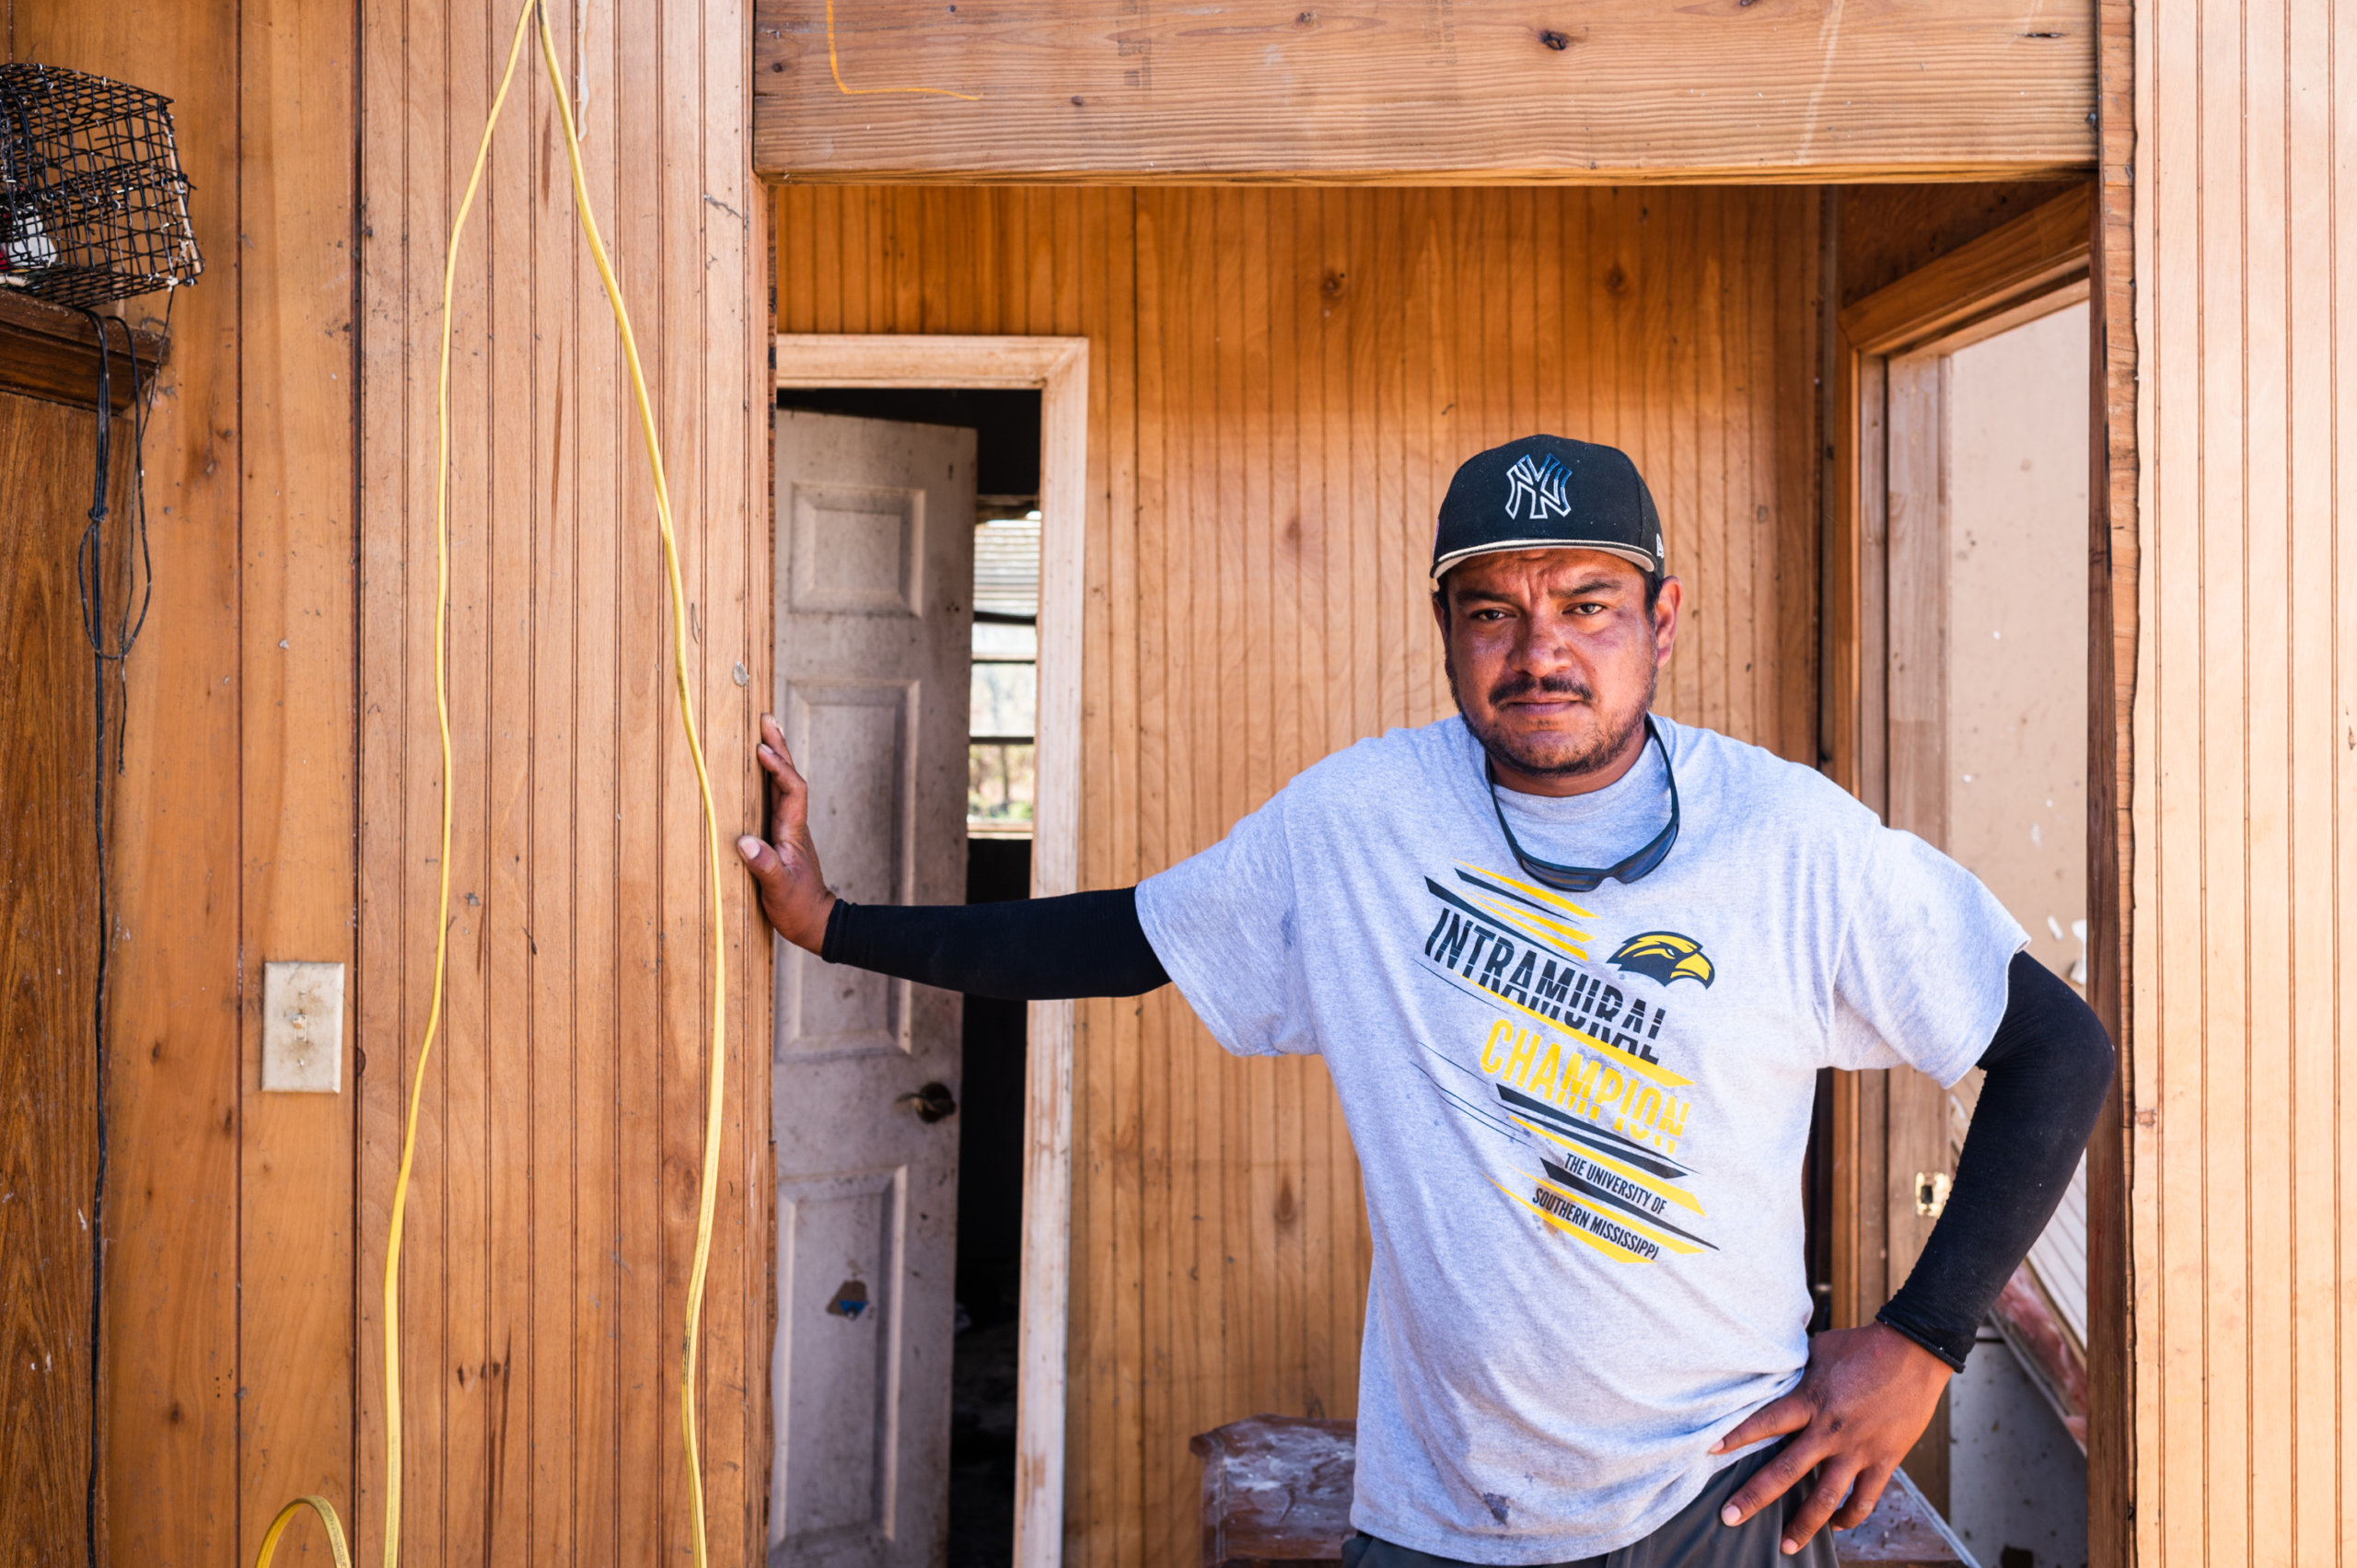 Luis Armendariz stands in the hallway of his home after Hurricane Ida tore his roof off